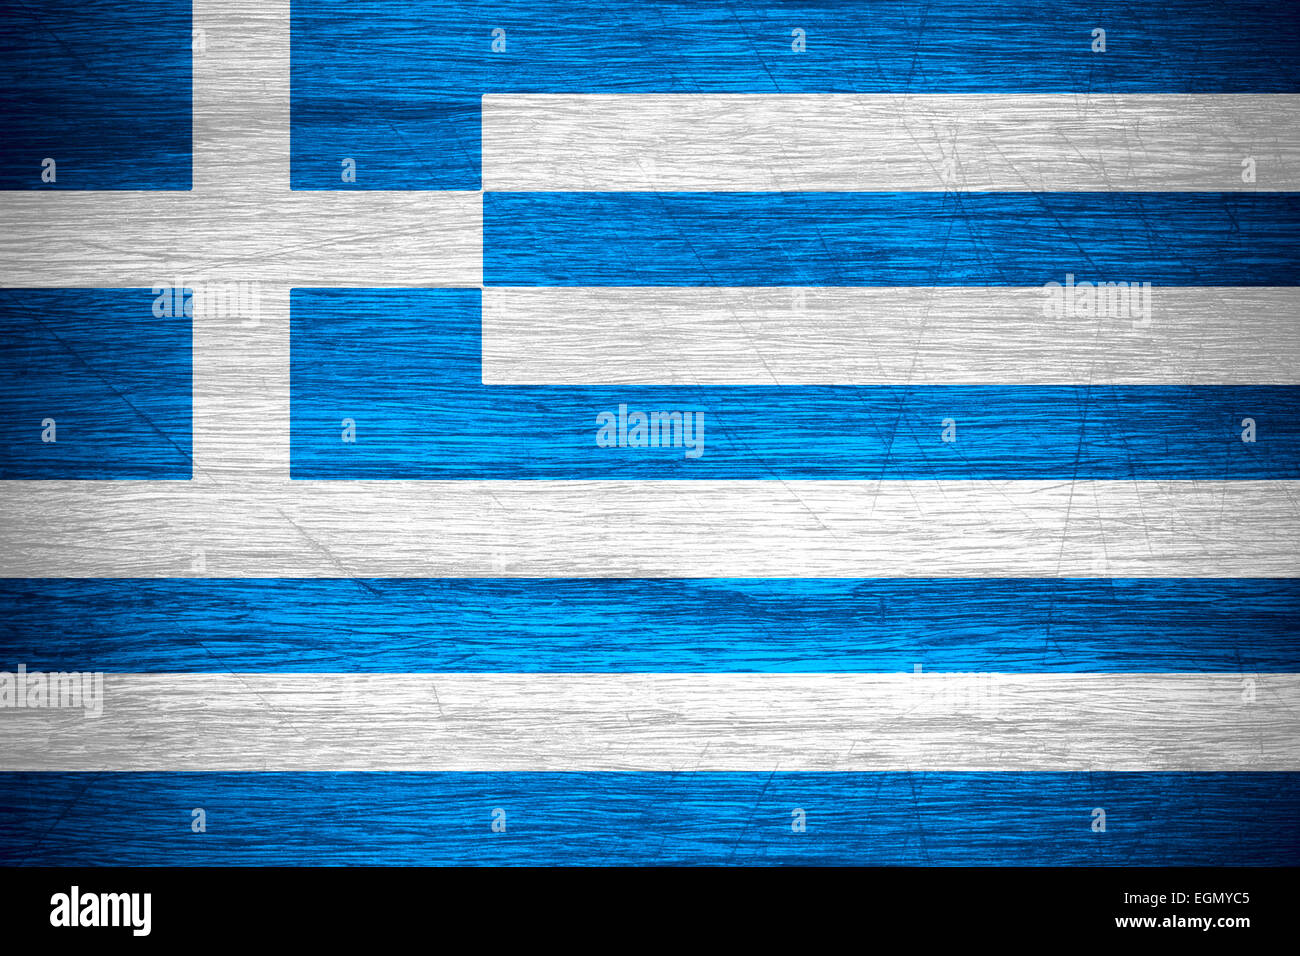 Greece flag or Greek banner on wooden texture Stock Photo